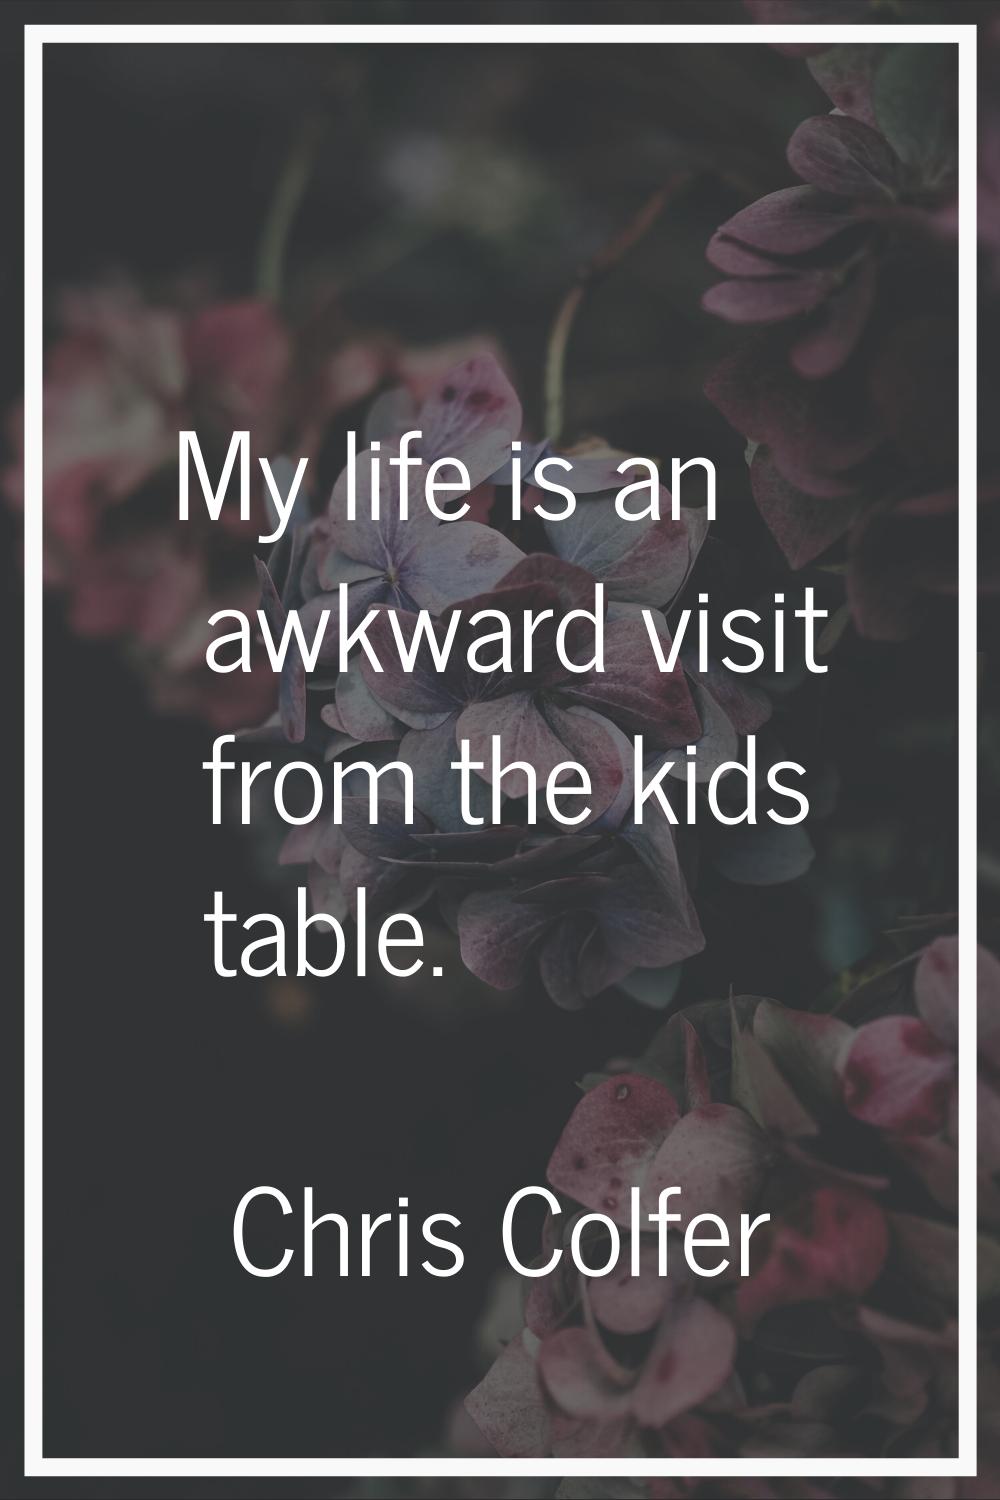 My life is an awkward visit from the kids table.